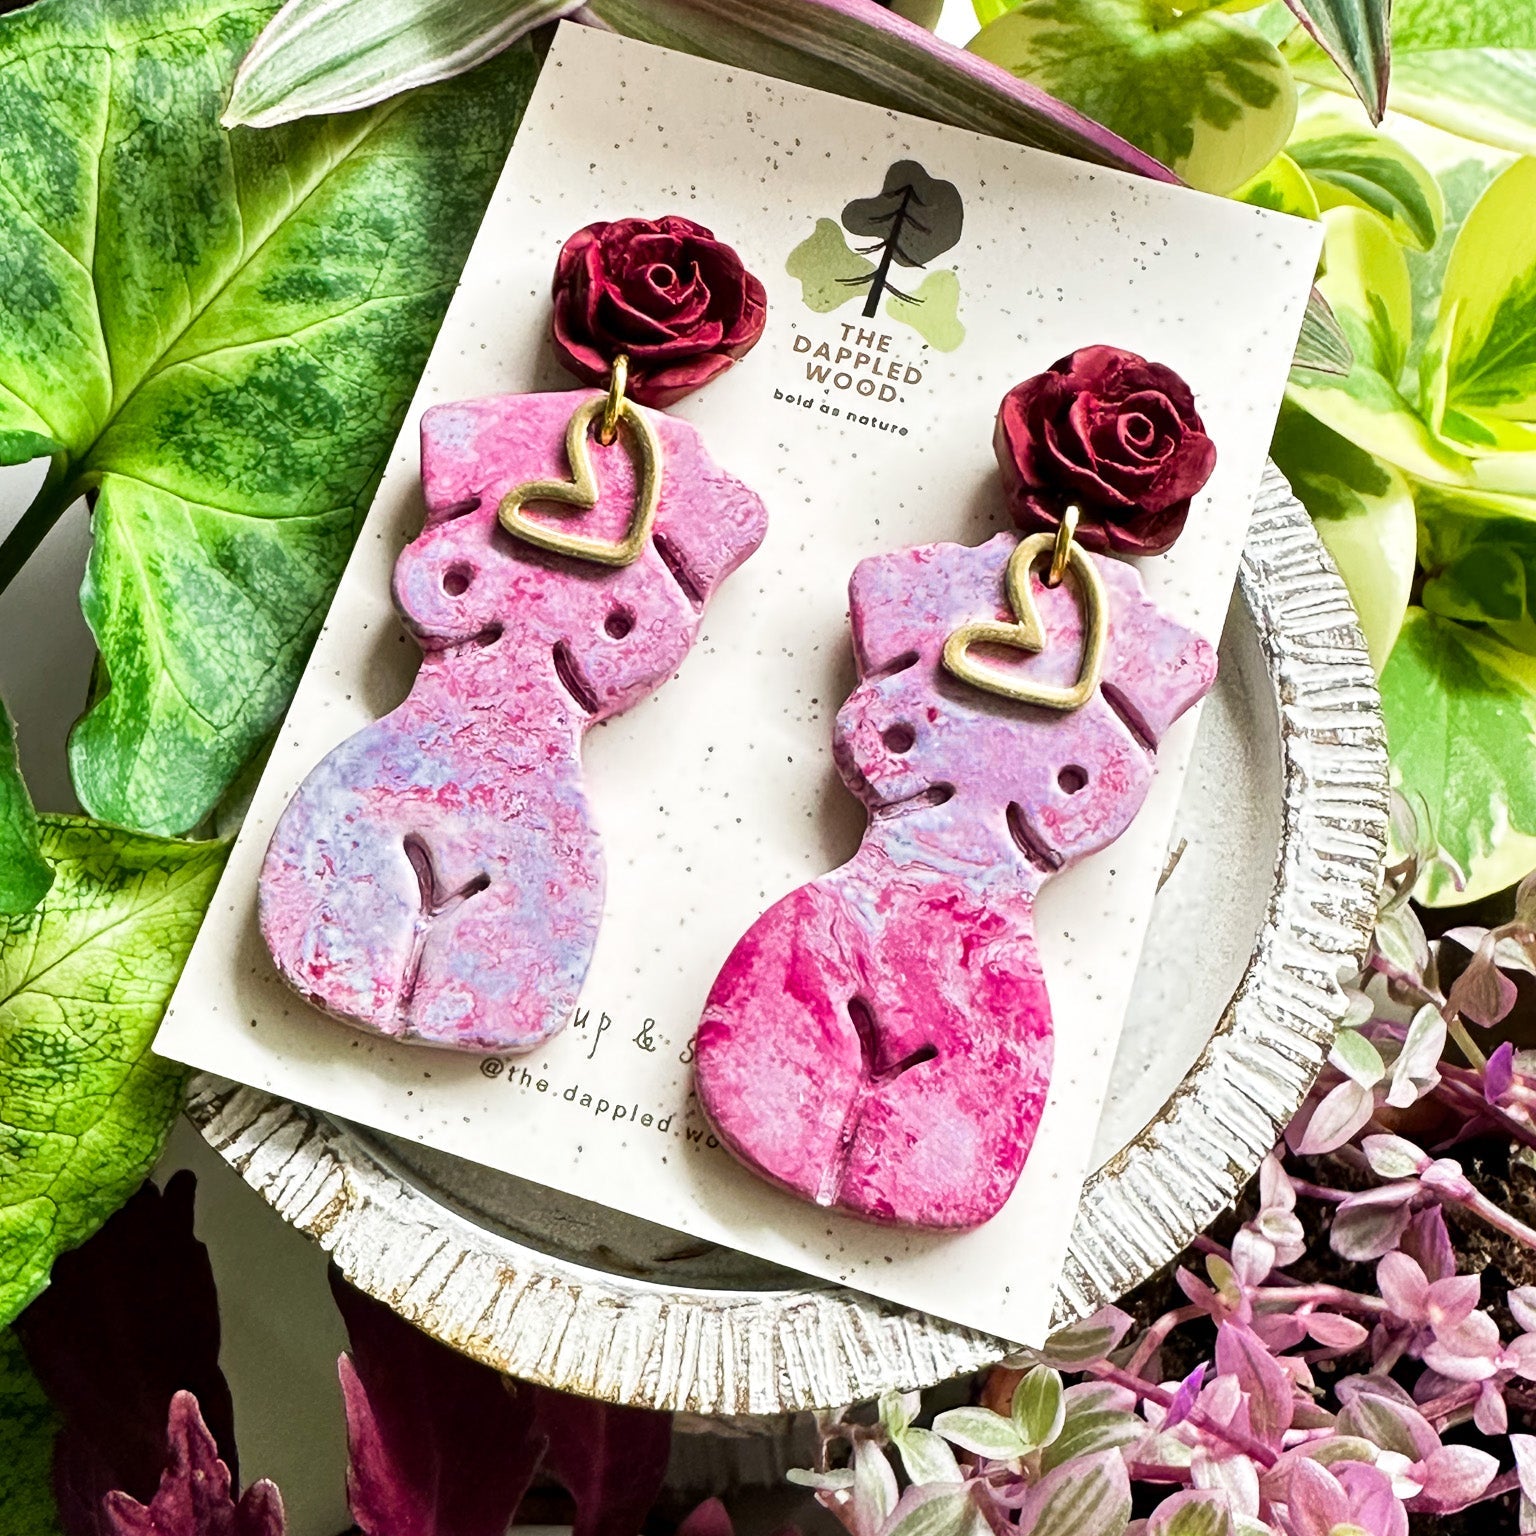 Marbled lavender and pink polymer clay earrings in the shape of a natural, curvy woman with a gold heart pendant, hanging from deep red rose posts. Earrings are showcased on a branded 'The Dappled Wood' card surrounded by lush greenery.